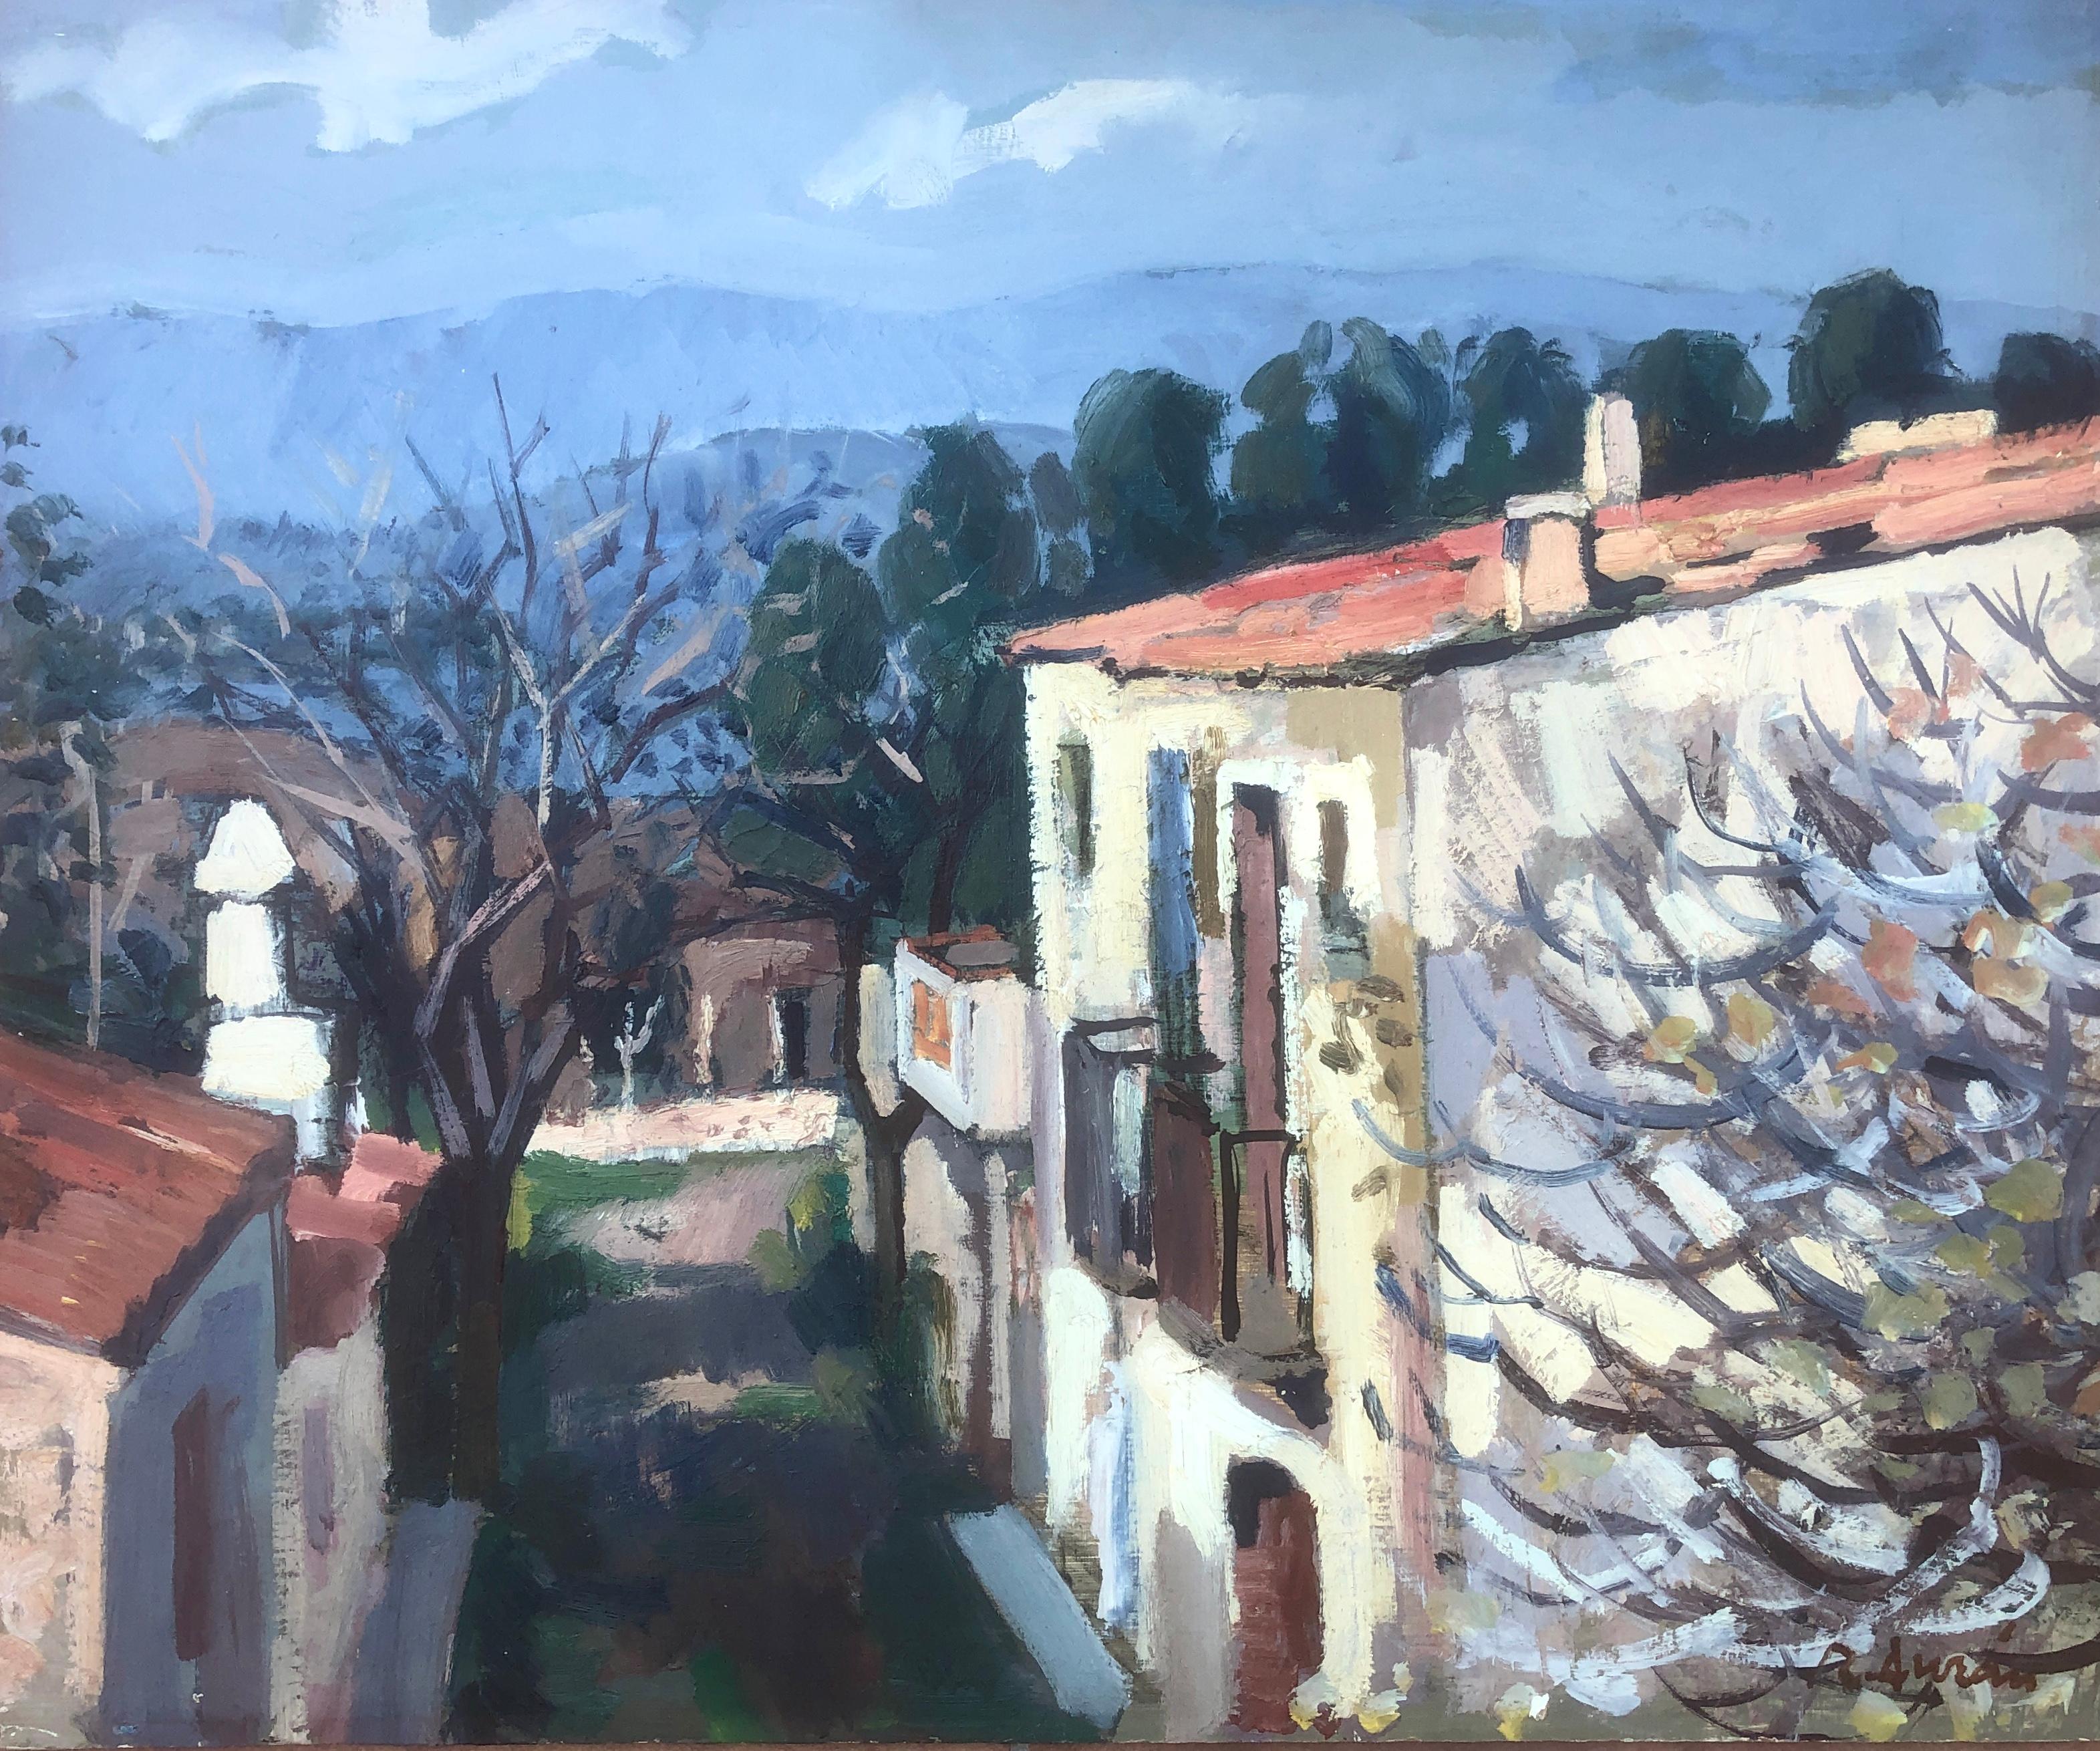 Rafael Duran Benet Landscape Painting - View of Spanish town Spain oil on board painting landscape